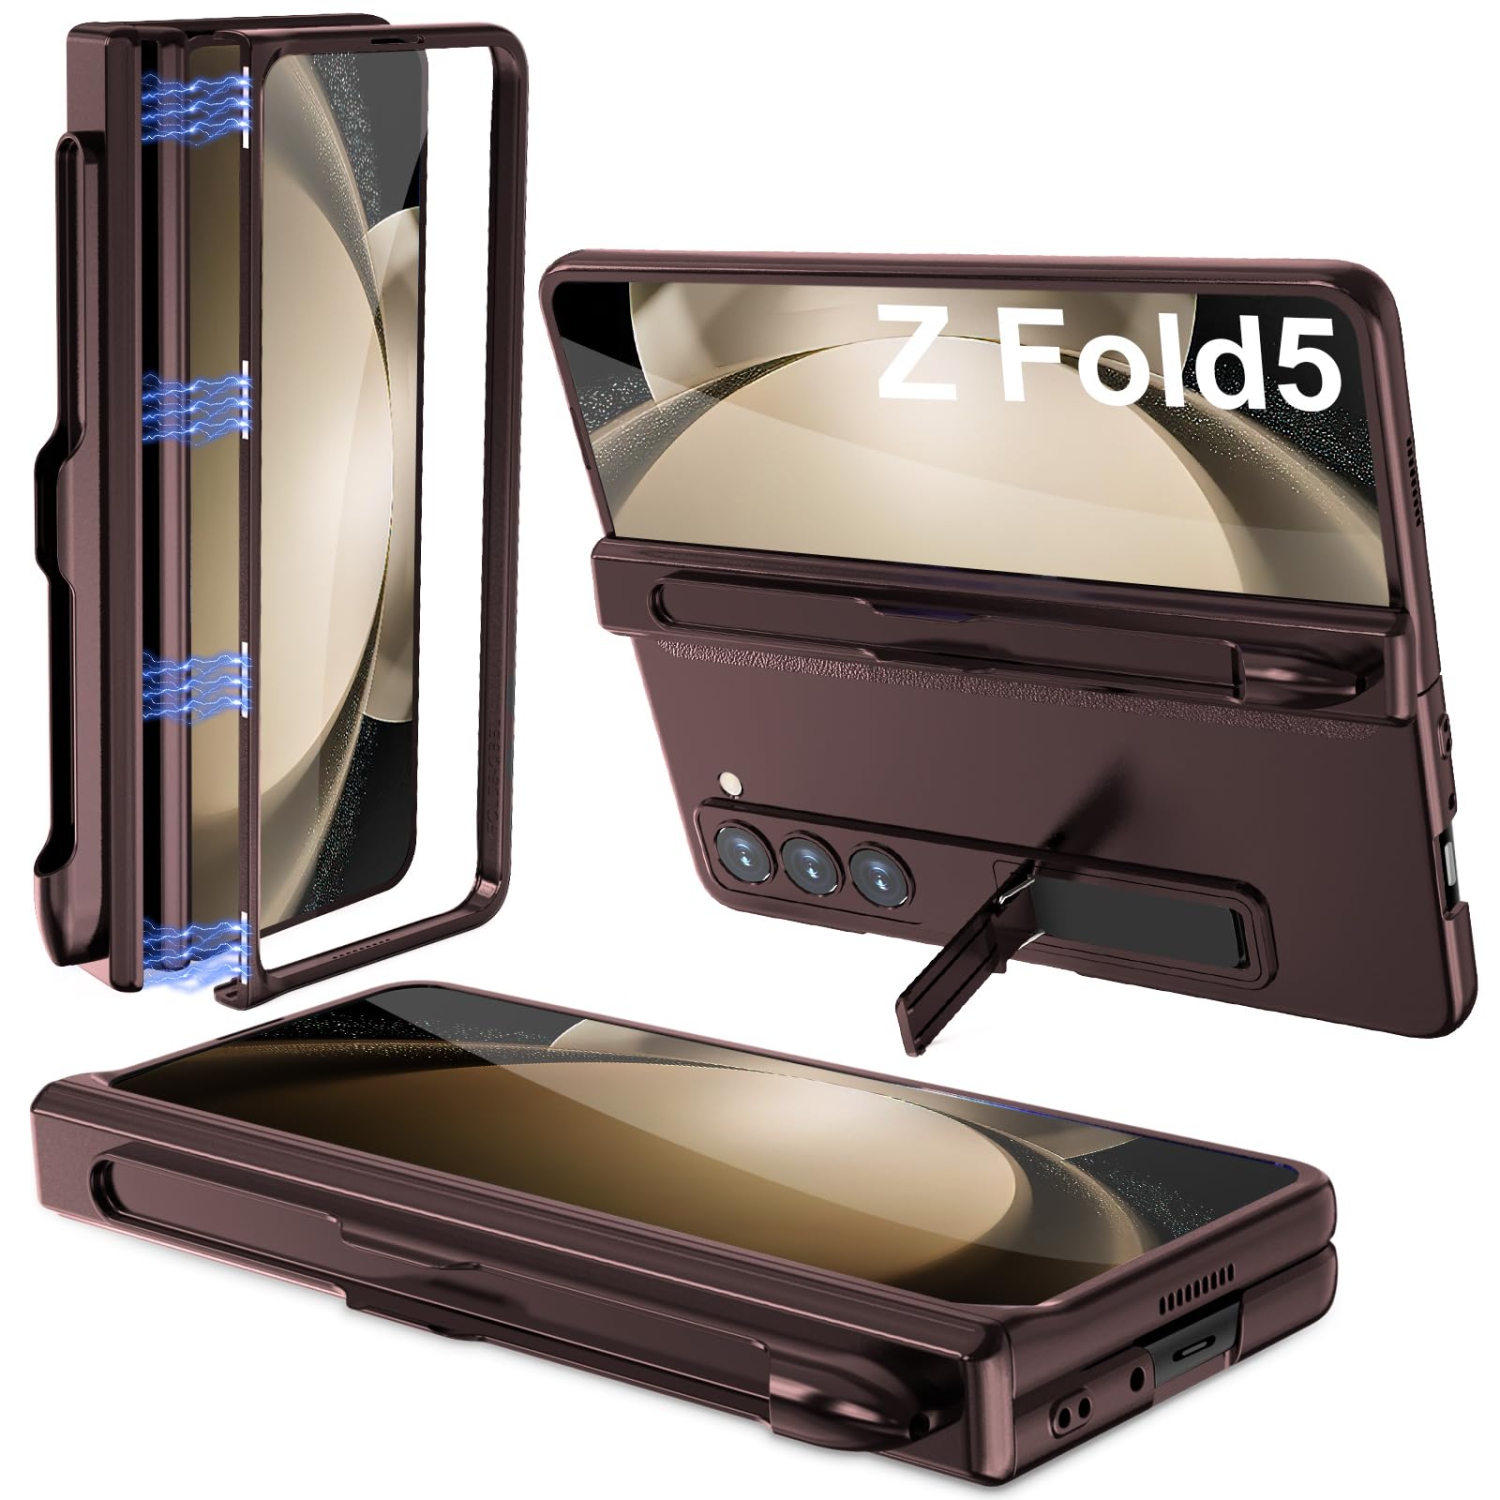 Samsung Galaxy Z Fold 5 Case with Magnetic Hinge Protection S Pen Holder Built-in Screen Protector Adjustable Stand, Camera Protection & Luxury Shockproof Thin Hard PC Cover